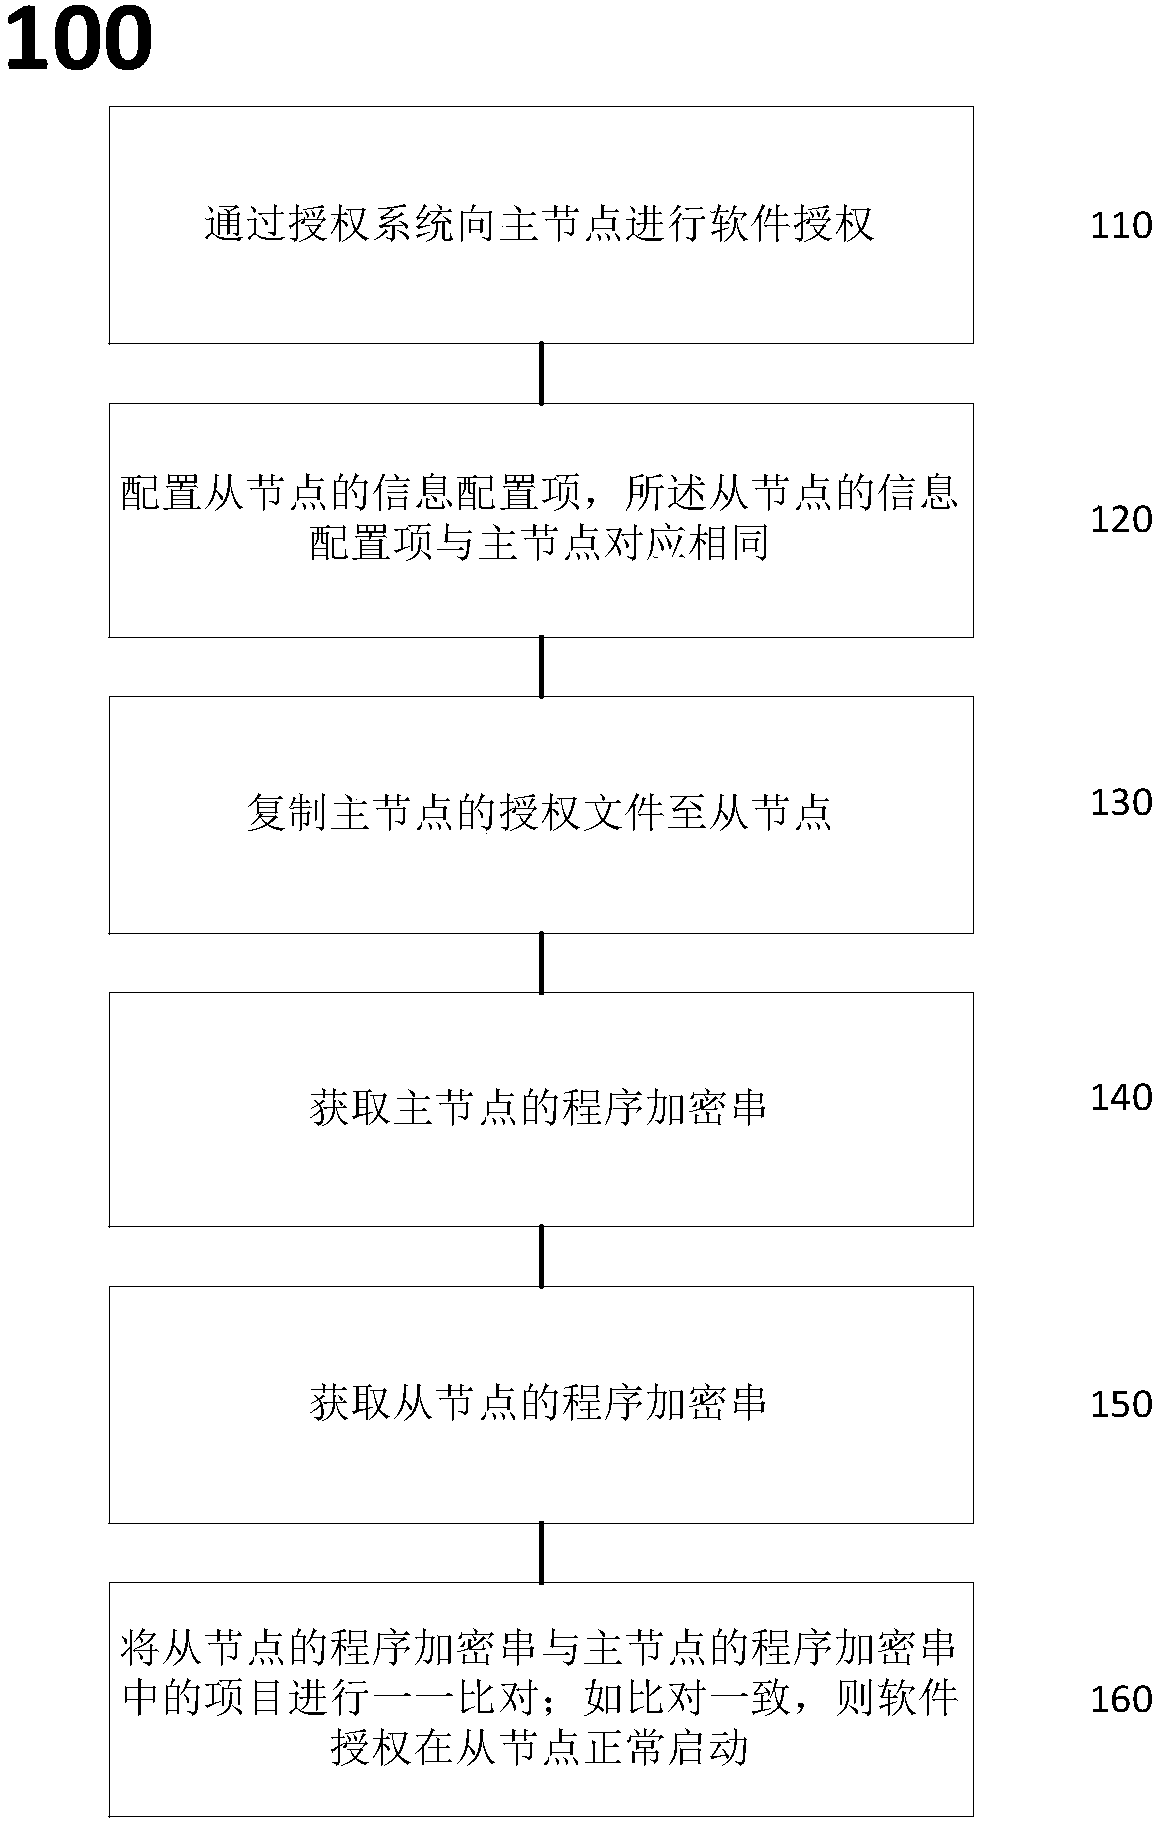 Software authorization method and system based on cluster deployment